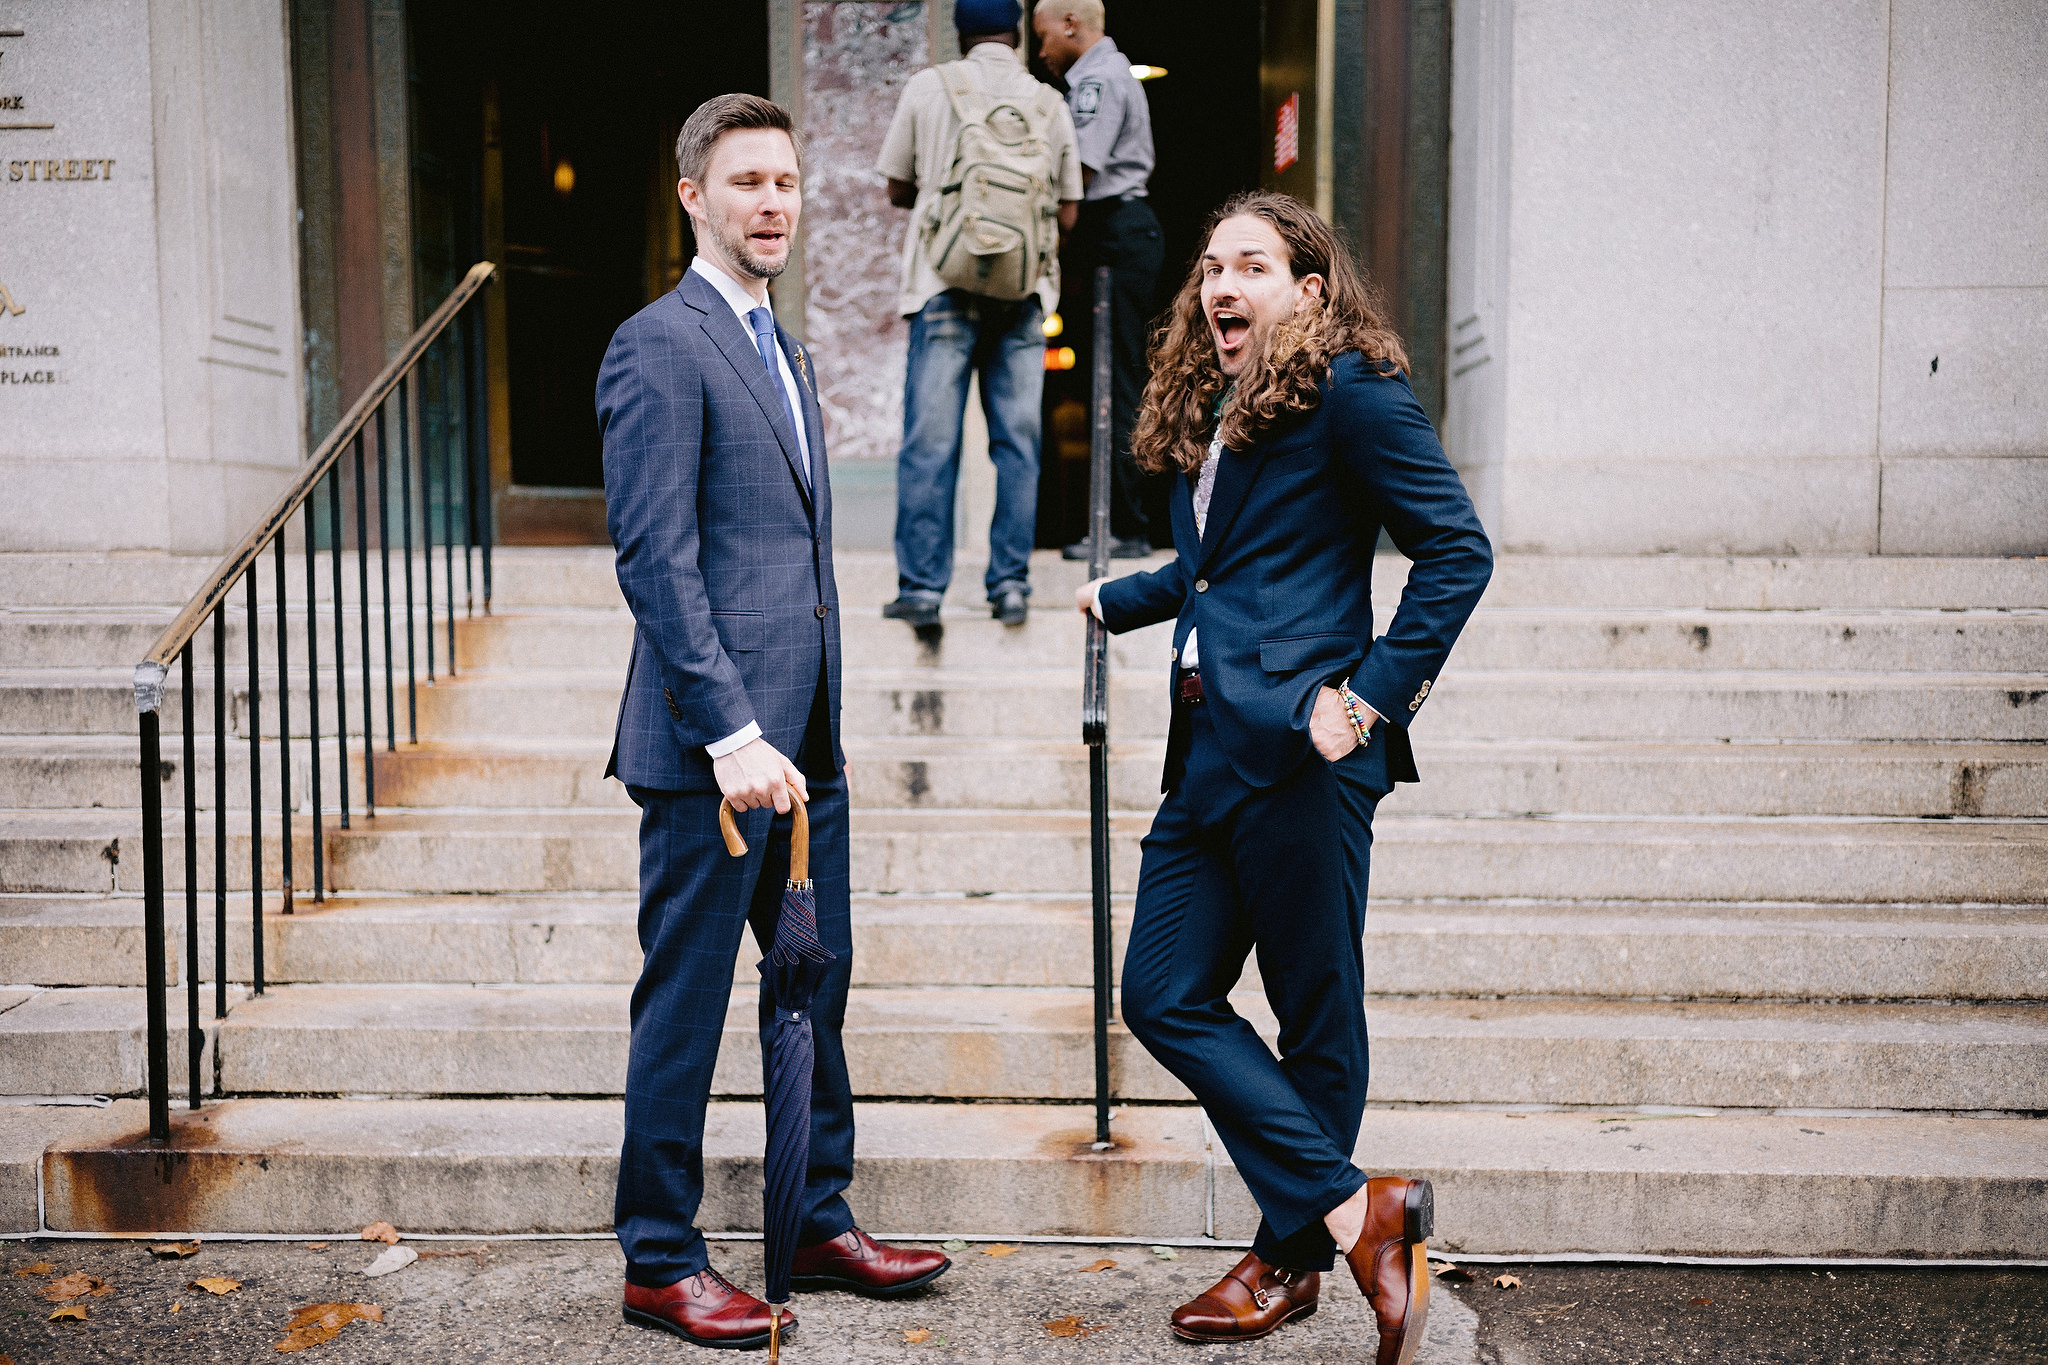 Groom and groom about to get married at city hall in New York City